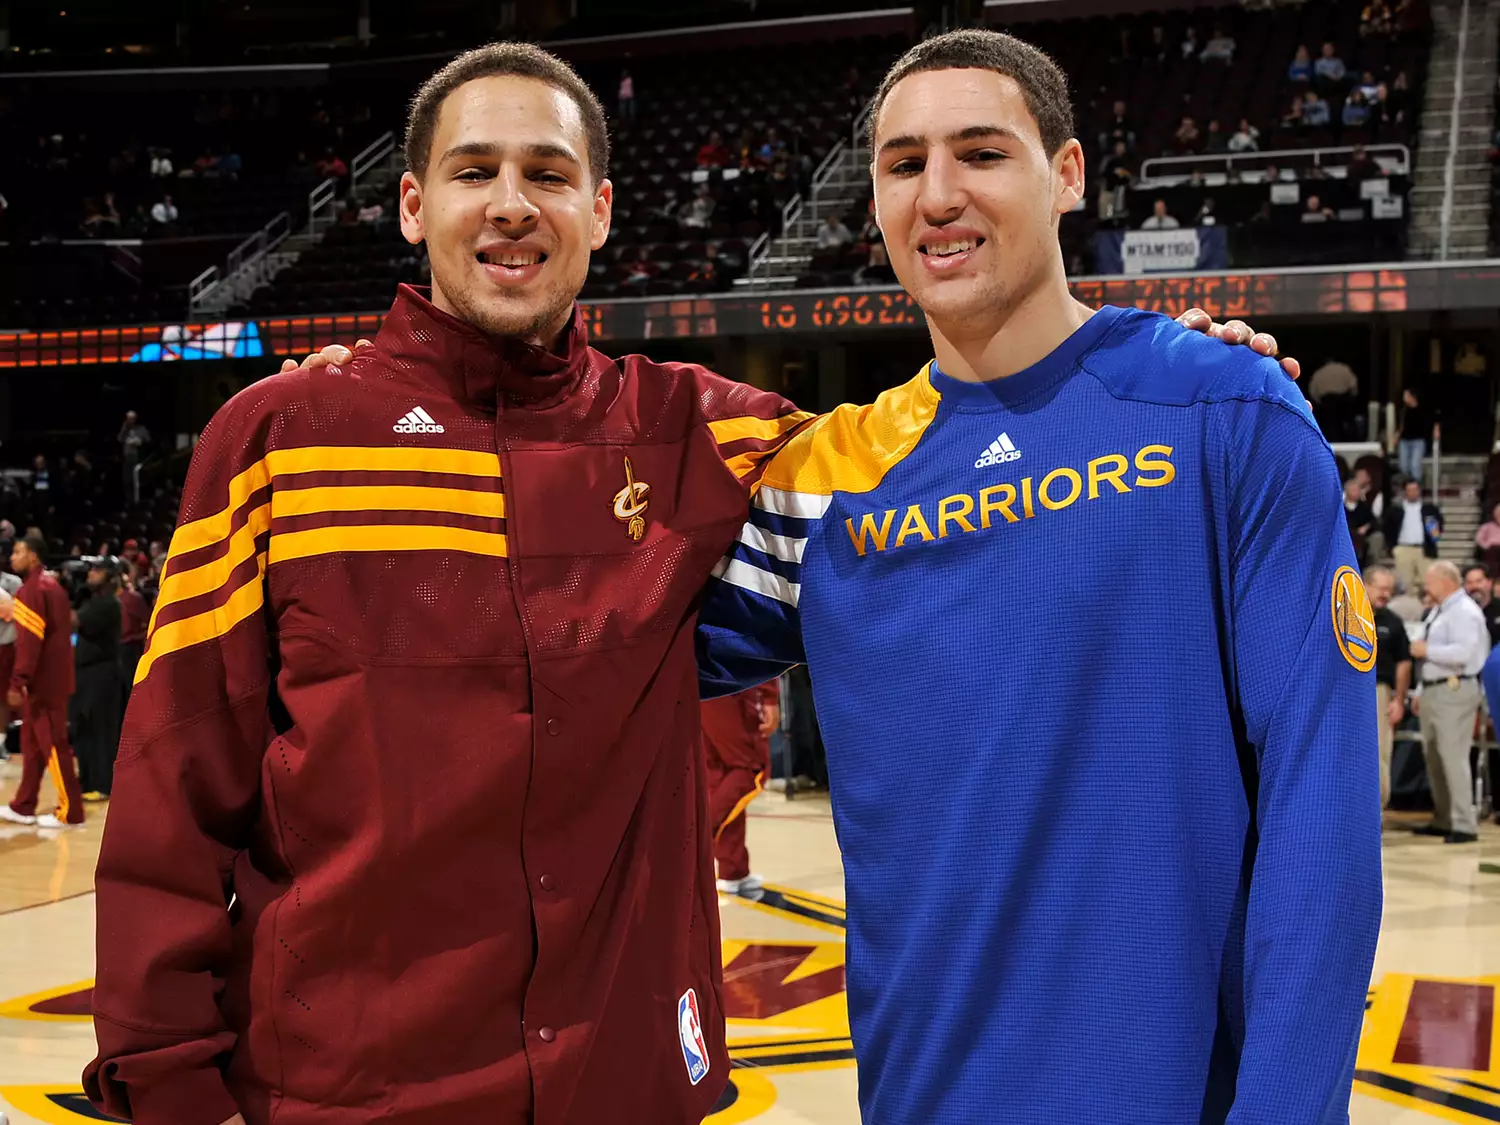 Mychel Thompson #21 of the Cleveland Cavaliers stands alongside his brother Klay Thompson #11 of the Golden State Warriors at The Quicken Loans Arena on January 17, 2012 in Cleveland, Ohio.